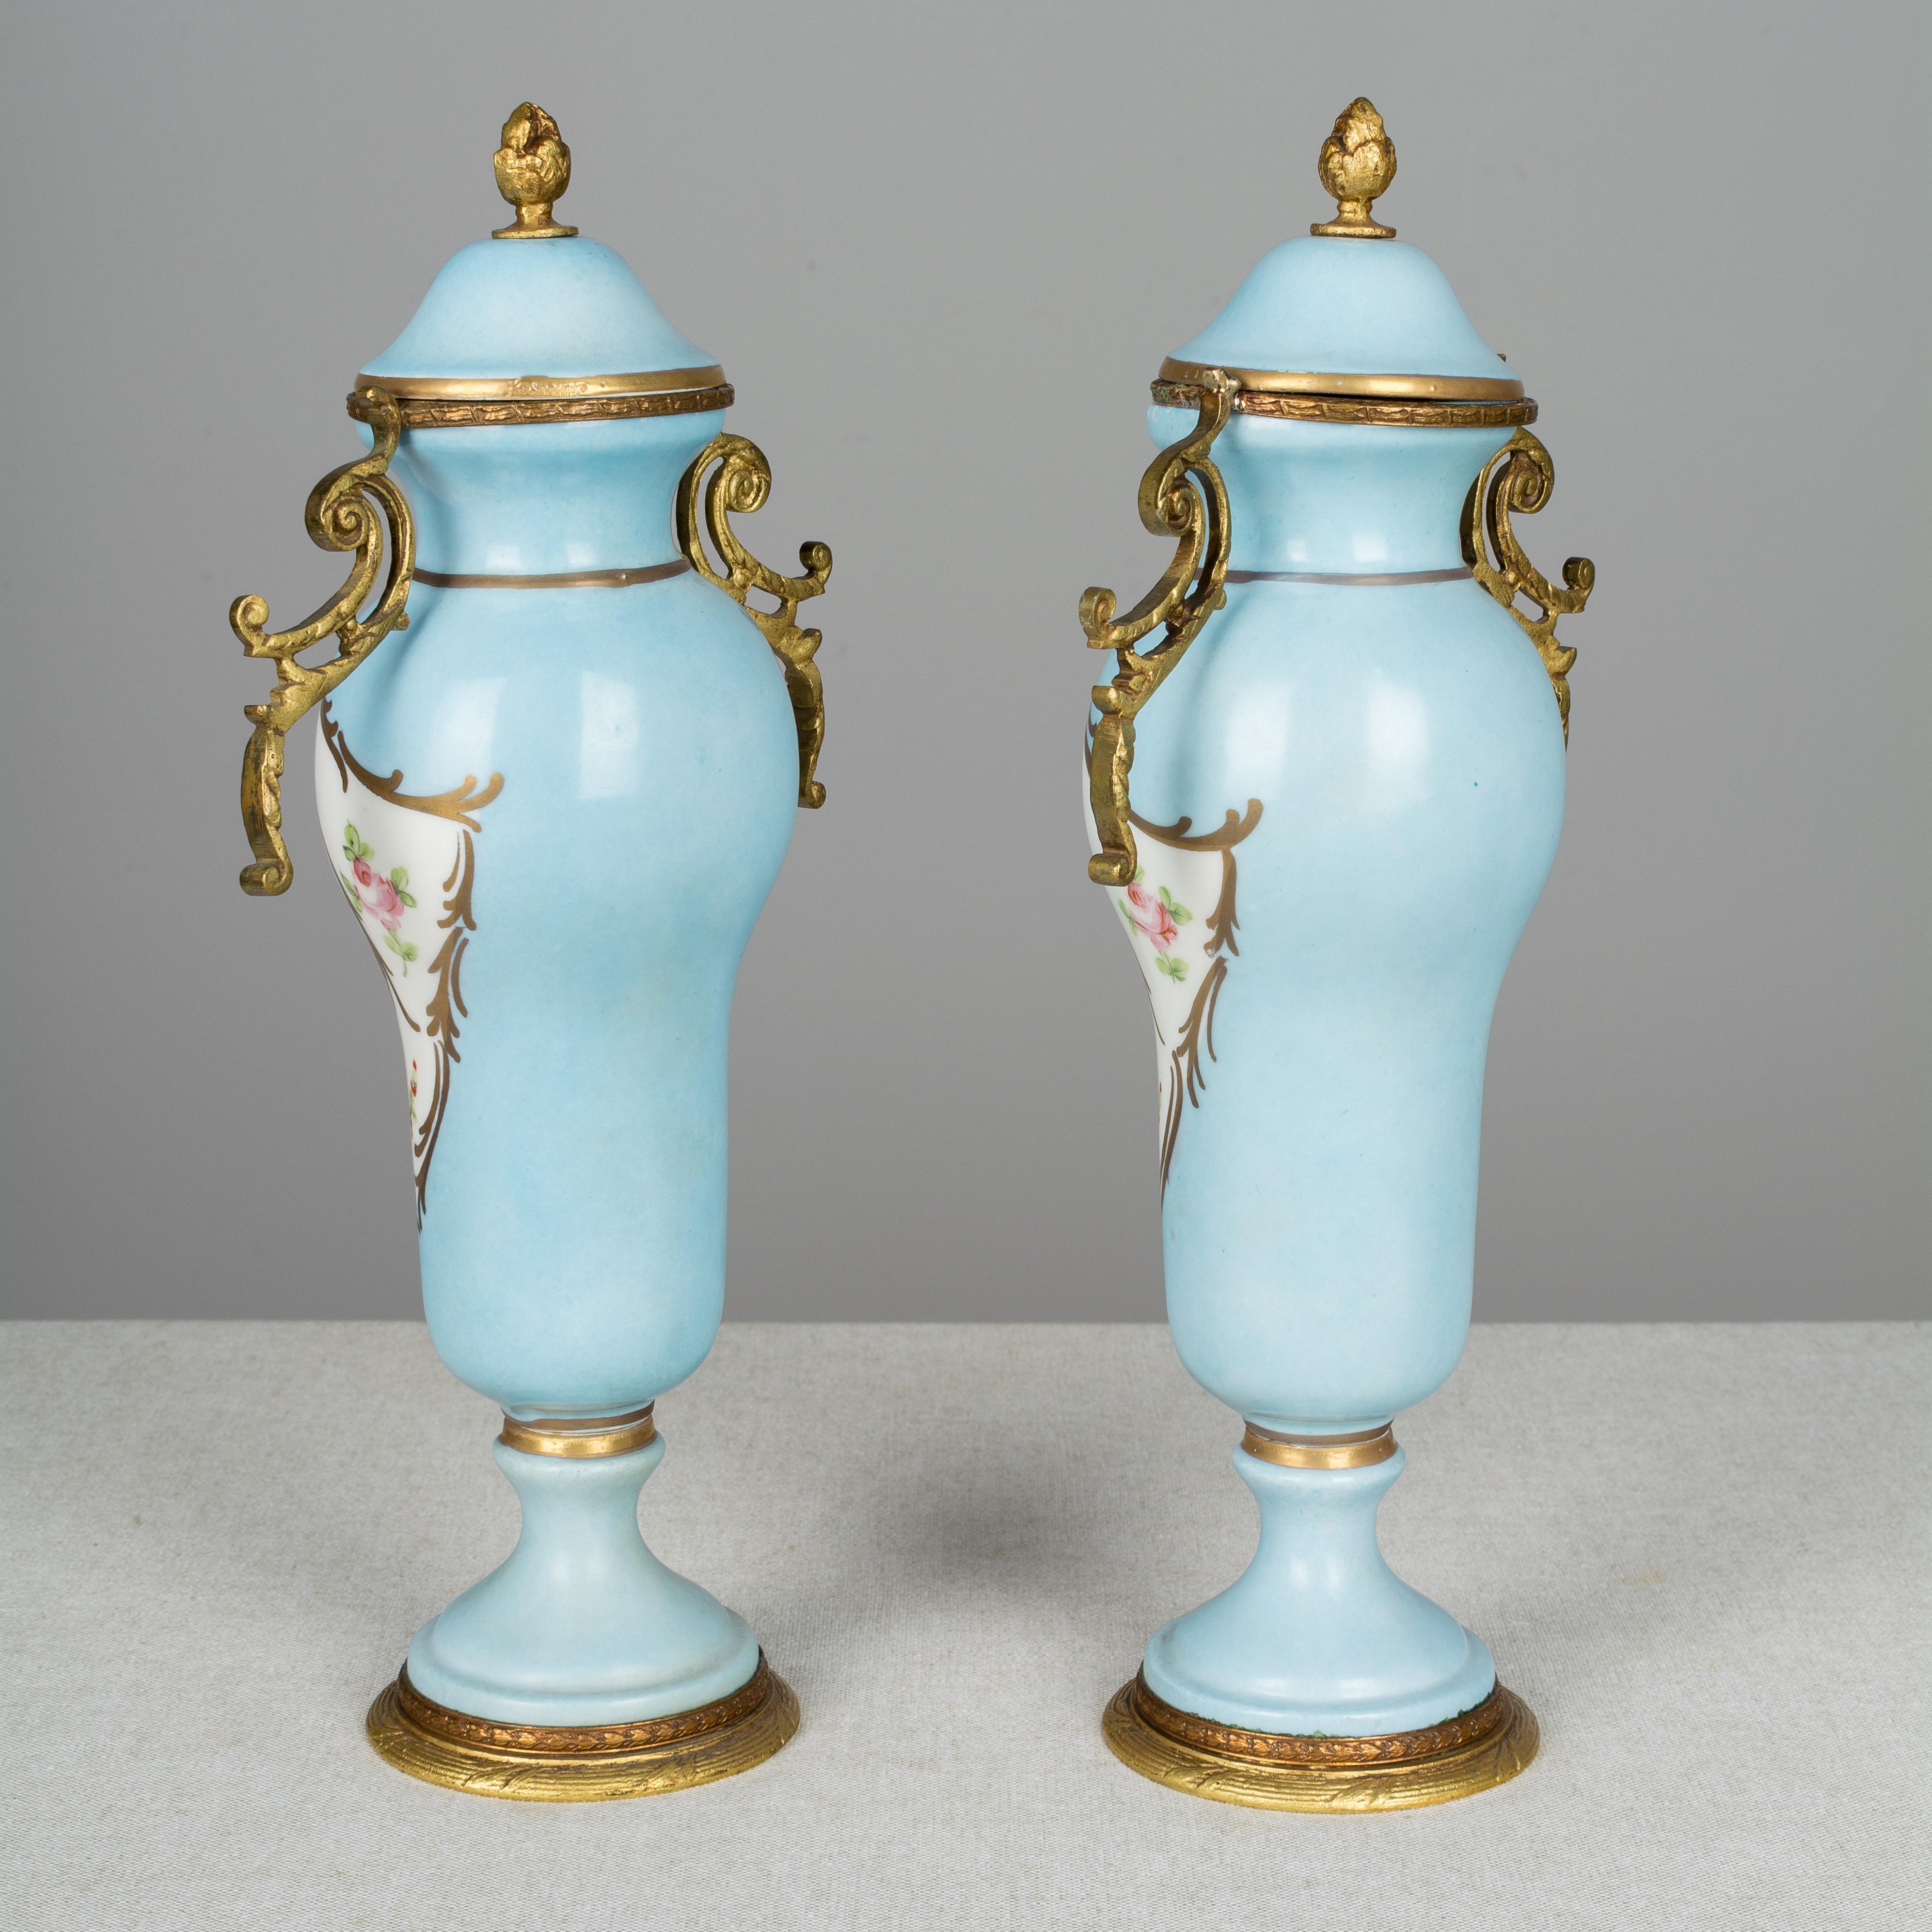 Pair of French Sèvres Porcelain Urns 1